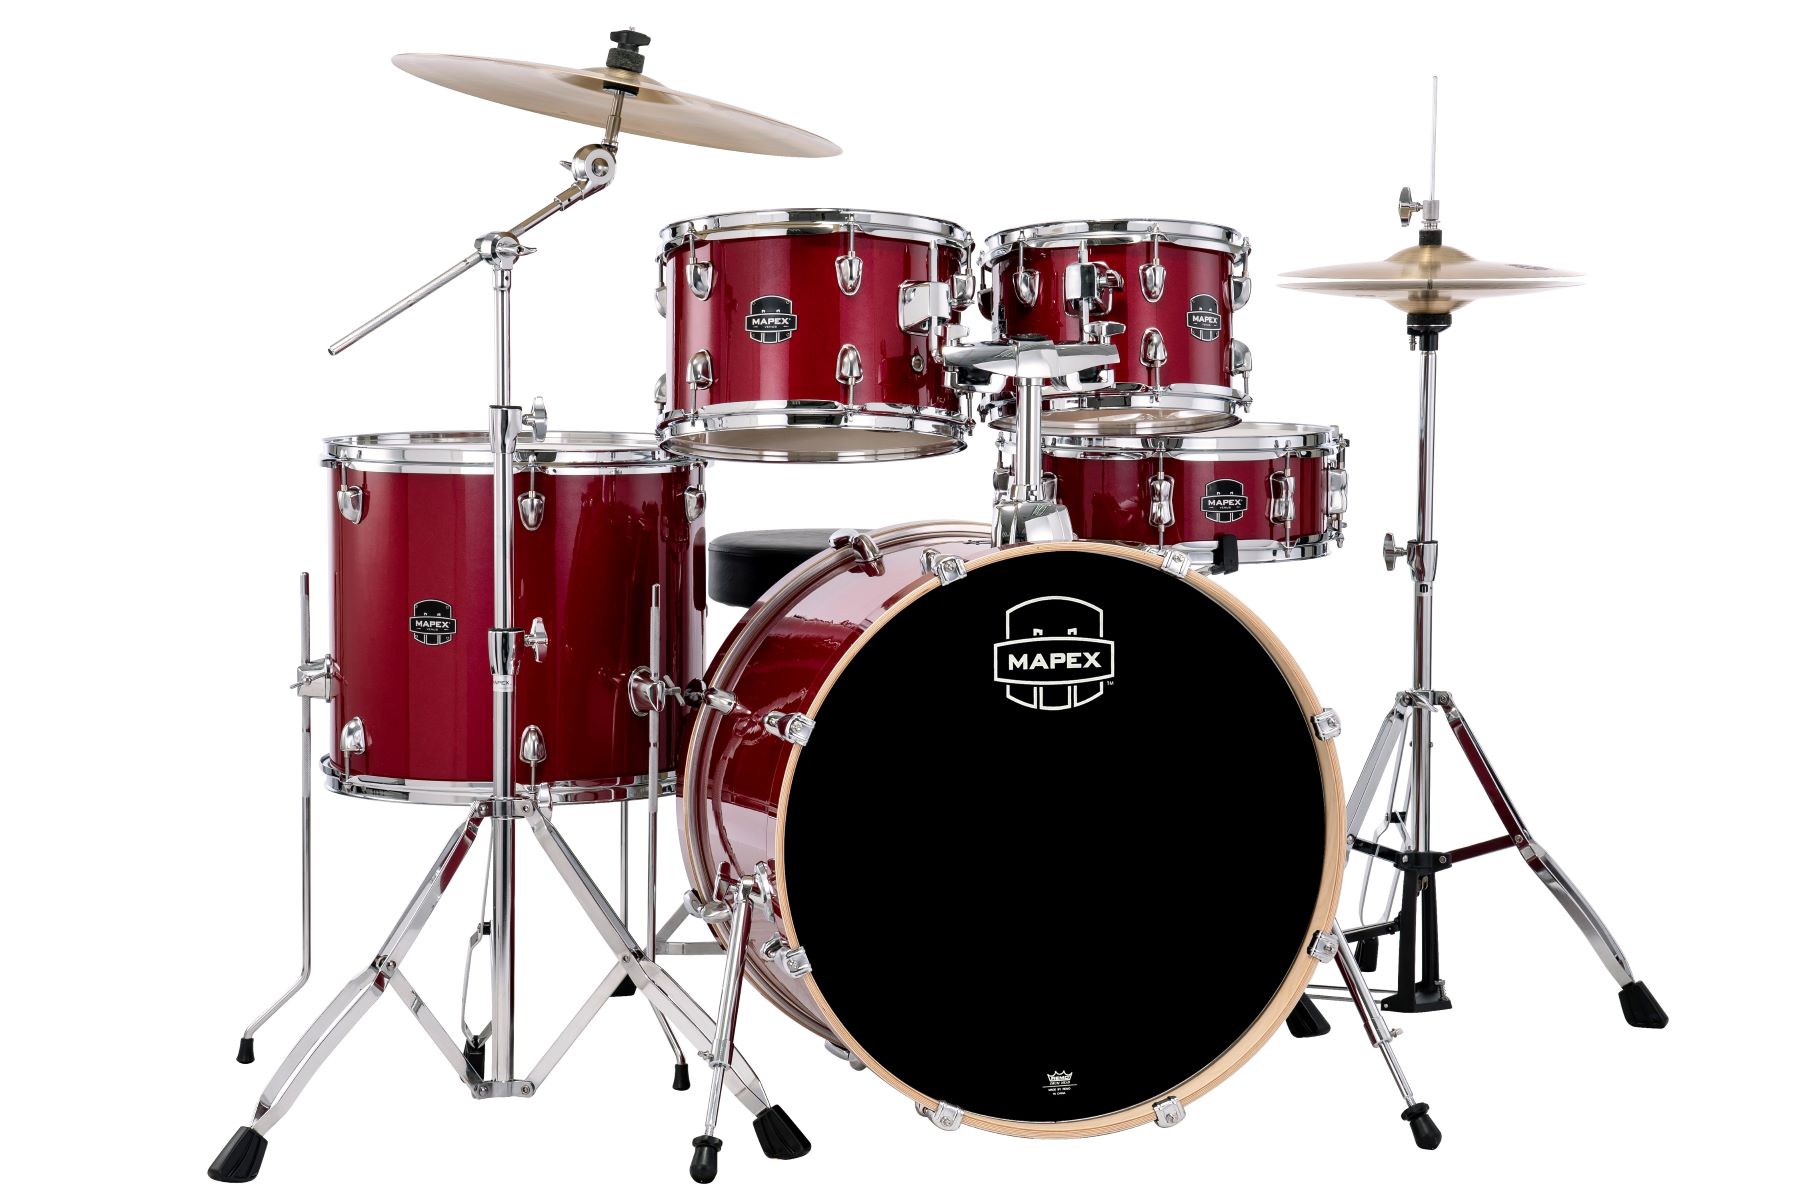 Who Makes Mapex Drums